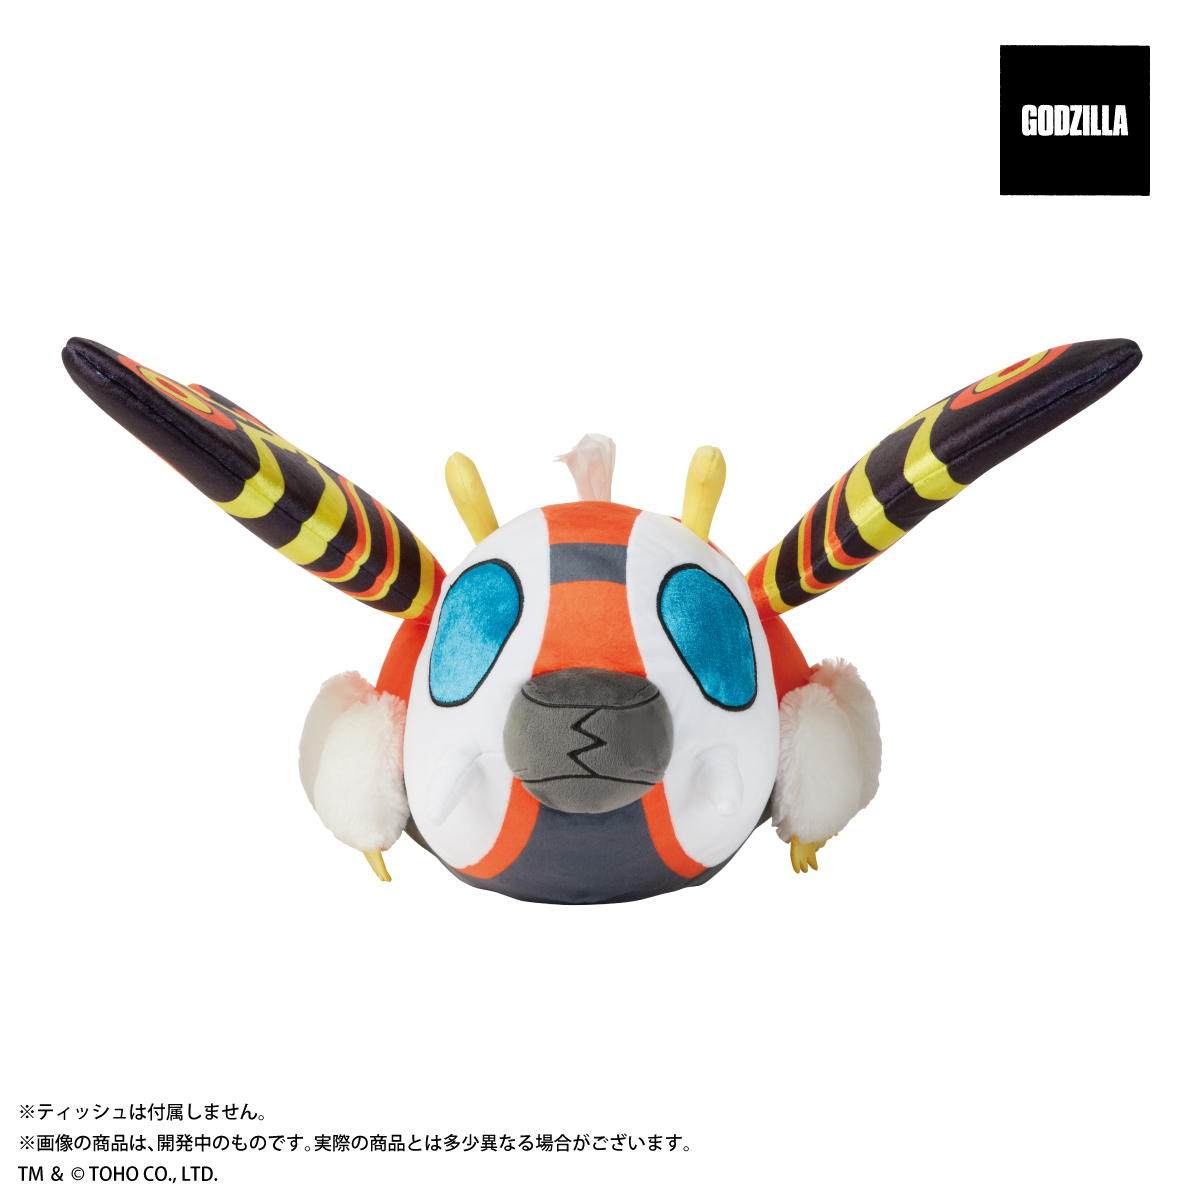 A promotional image of the Mothra (Imago) Tissue Case product from Premium Bandai featuring a close-up view of the product from the front.